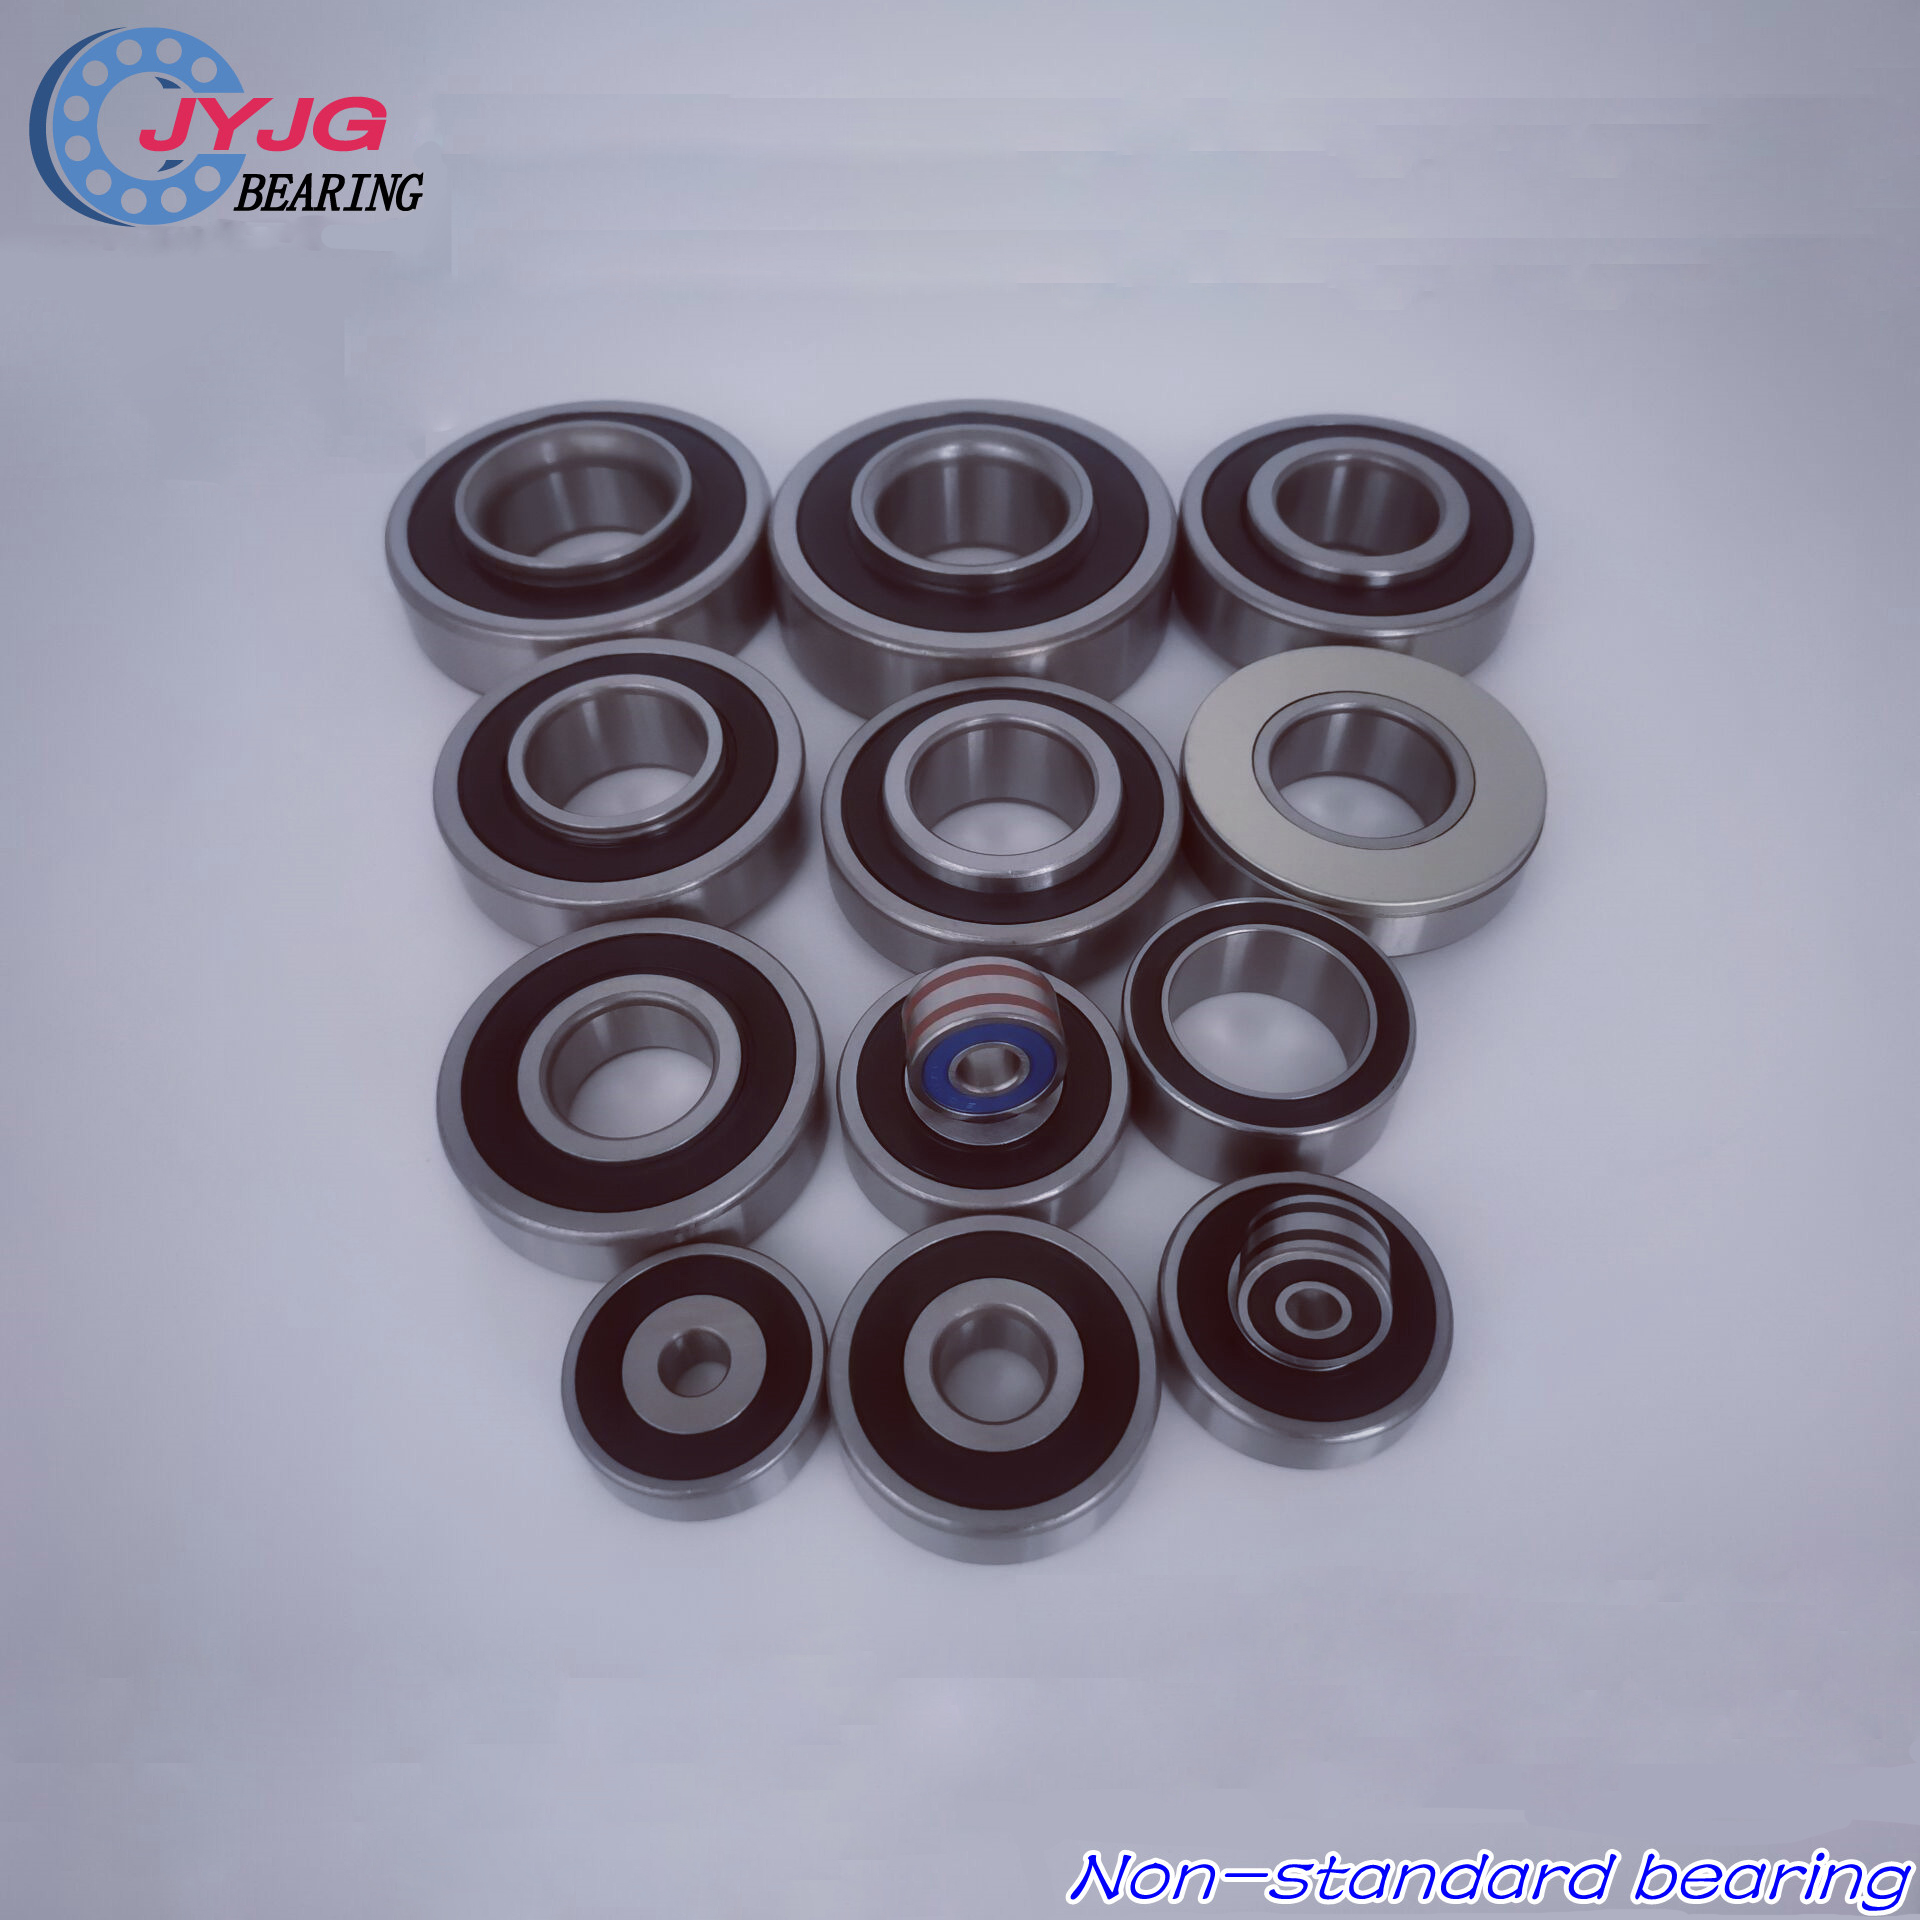 Automobile Generator Non-standard Bearings Featured Image